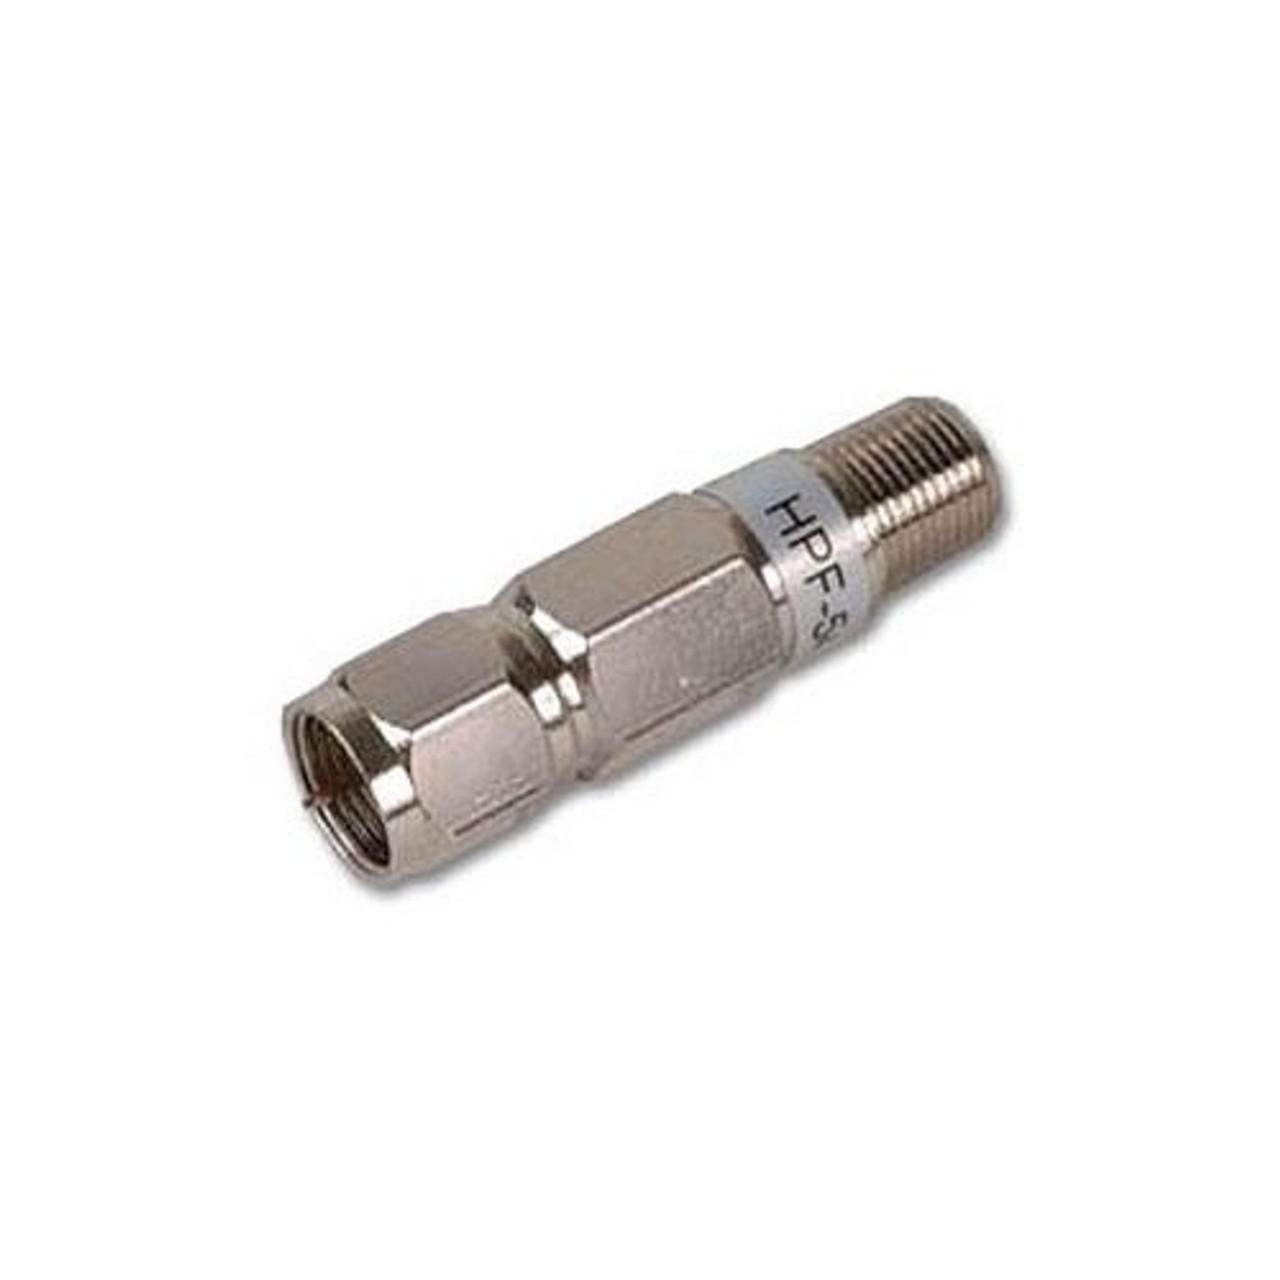 ASKA HPF-54 High Pass Filter 54 - 1000 MHz 1 GHz 40 dB Rejection 20 dB Return Loss Inline Attenuates Noise 1 Pack In-Line High Pass Filter Coupler Barrel Adapter, Part # HPF54